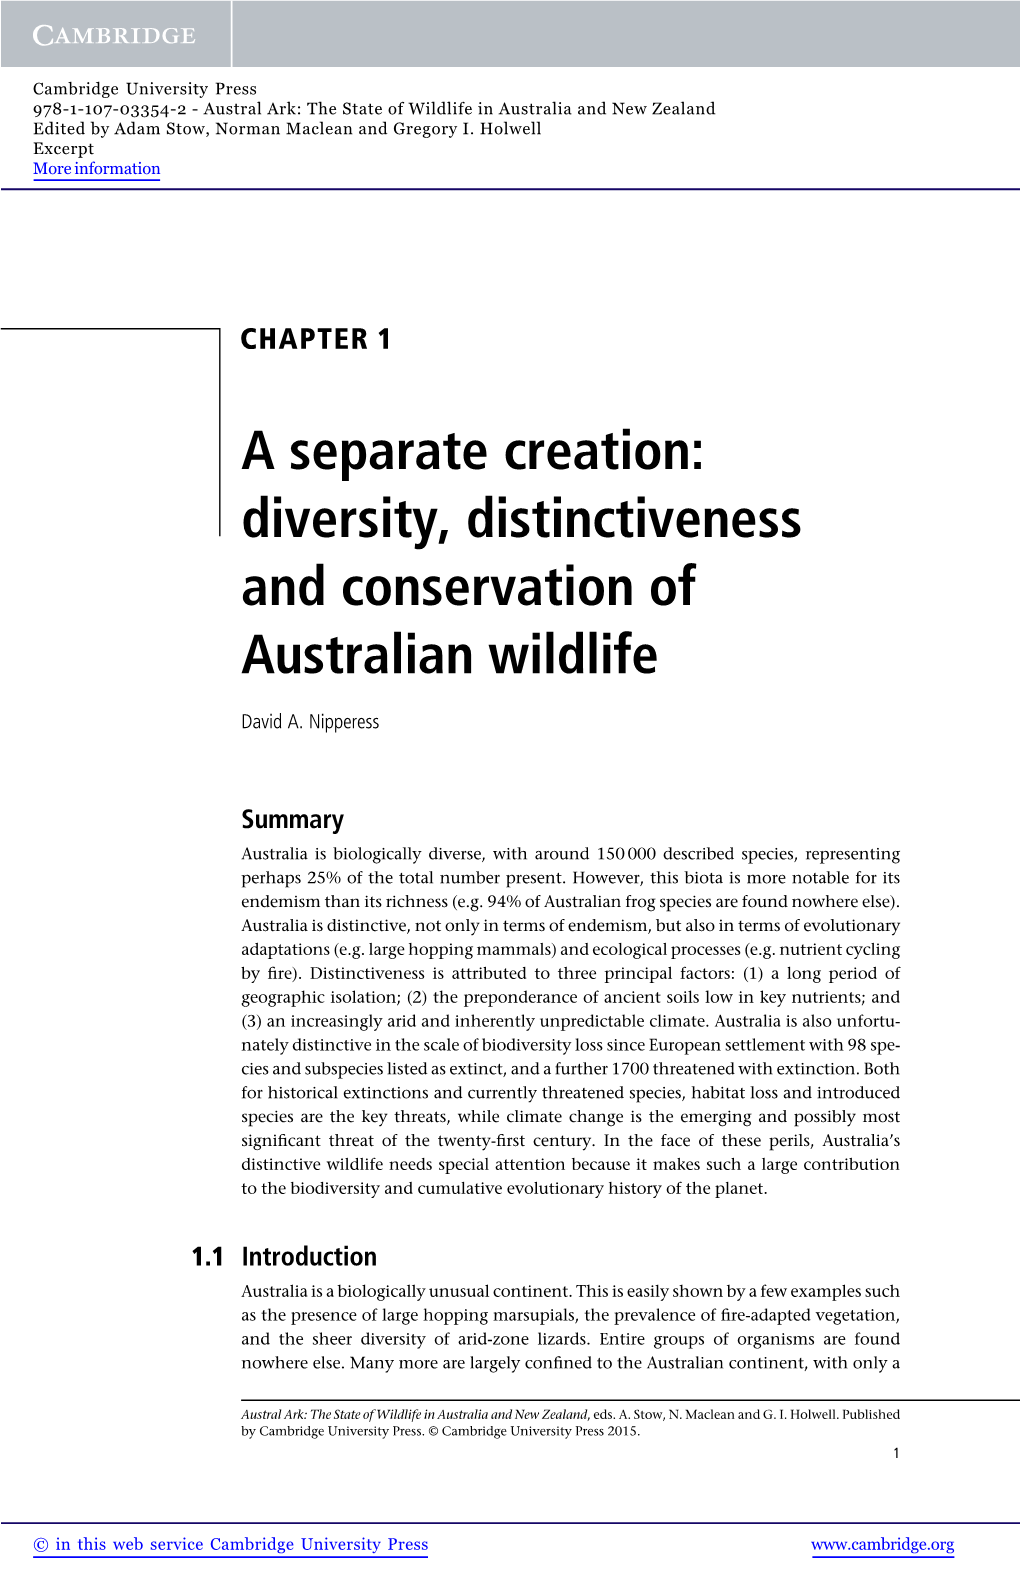 A Separate Creation: Diversity, Distinctiveness and Conservation of Australian Wildlife